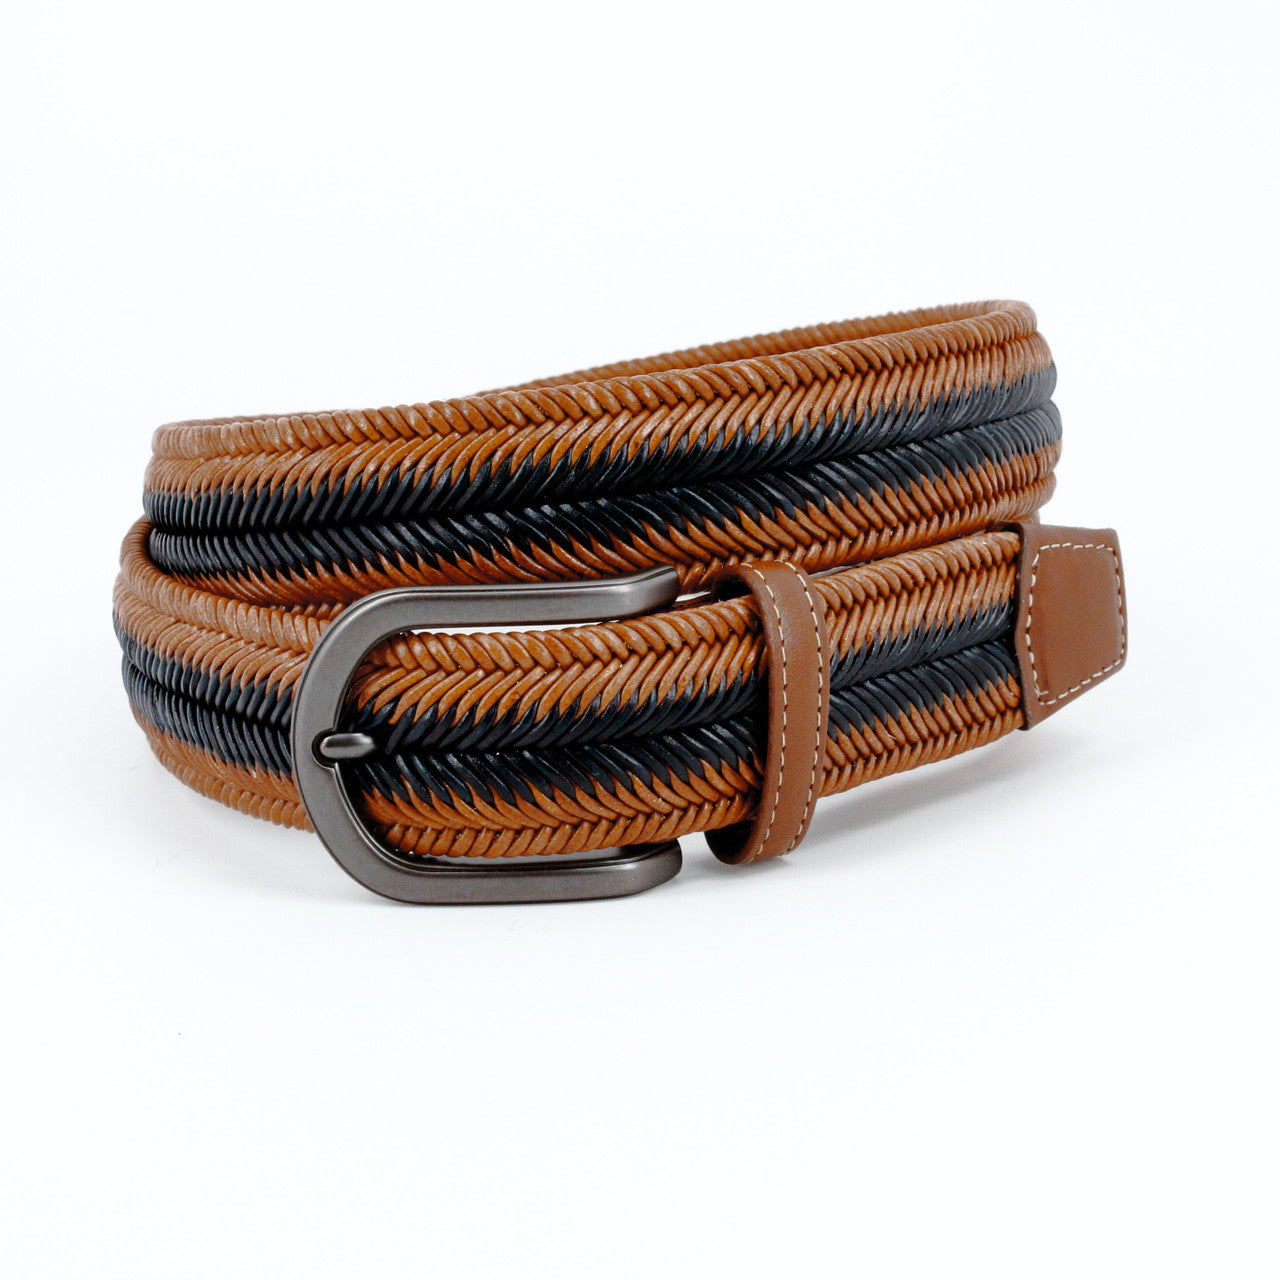 Italian Woven Herringbone Stretch Leather Belt in Saddle and Navy by Torino Leather